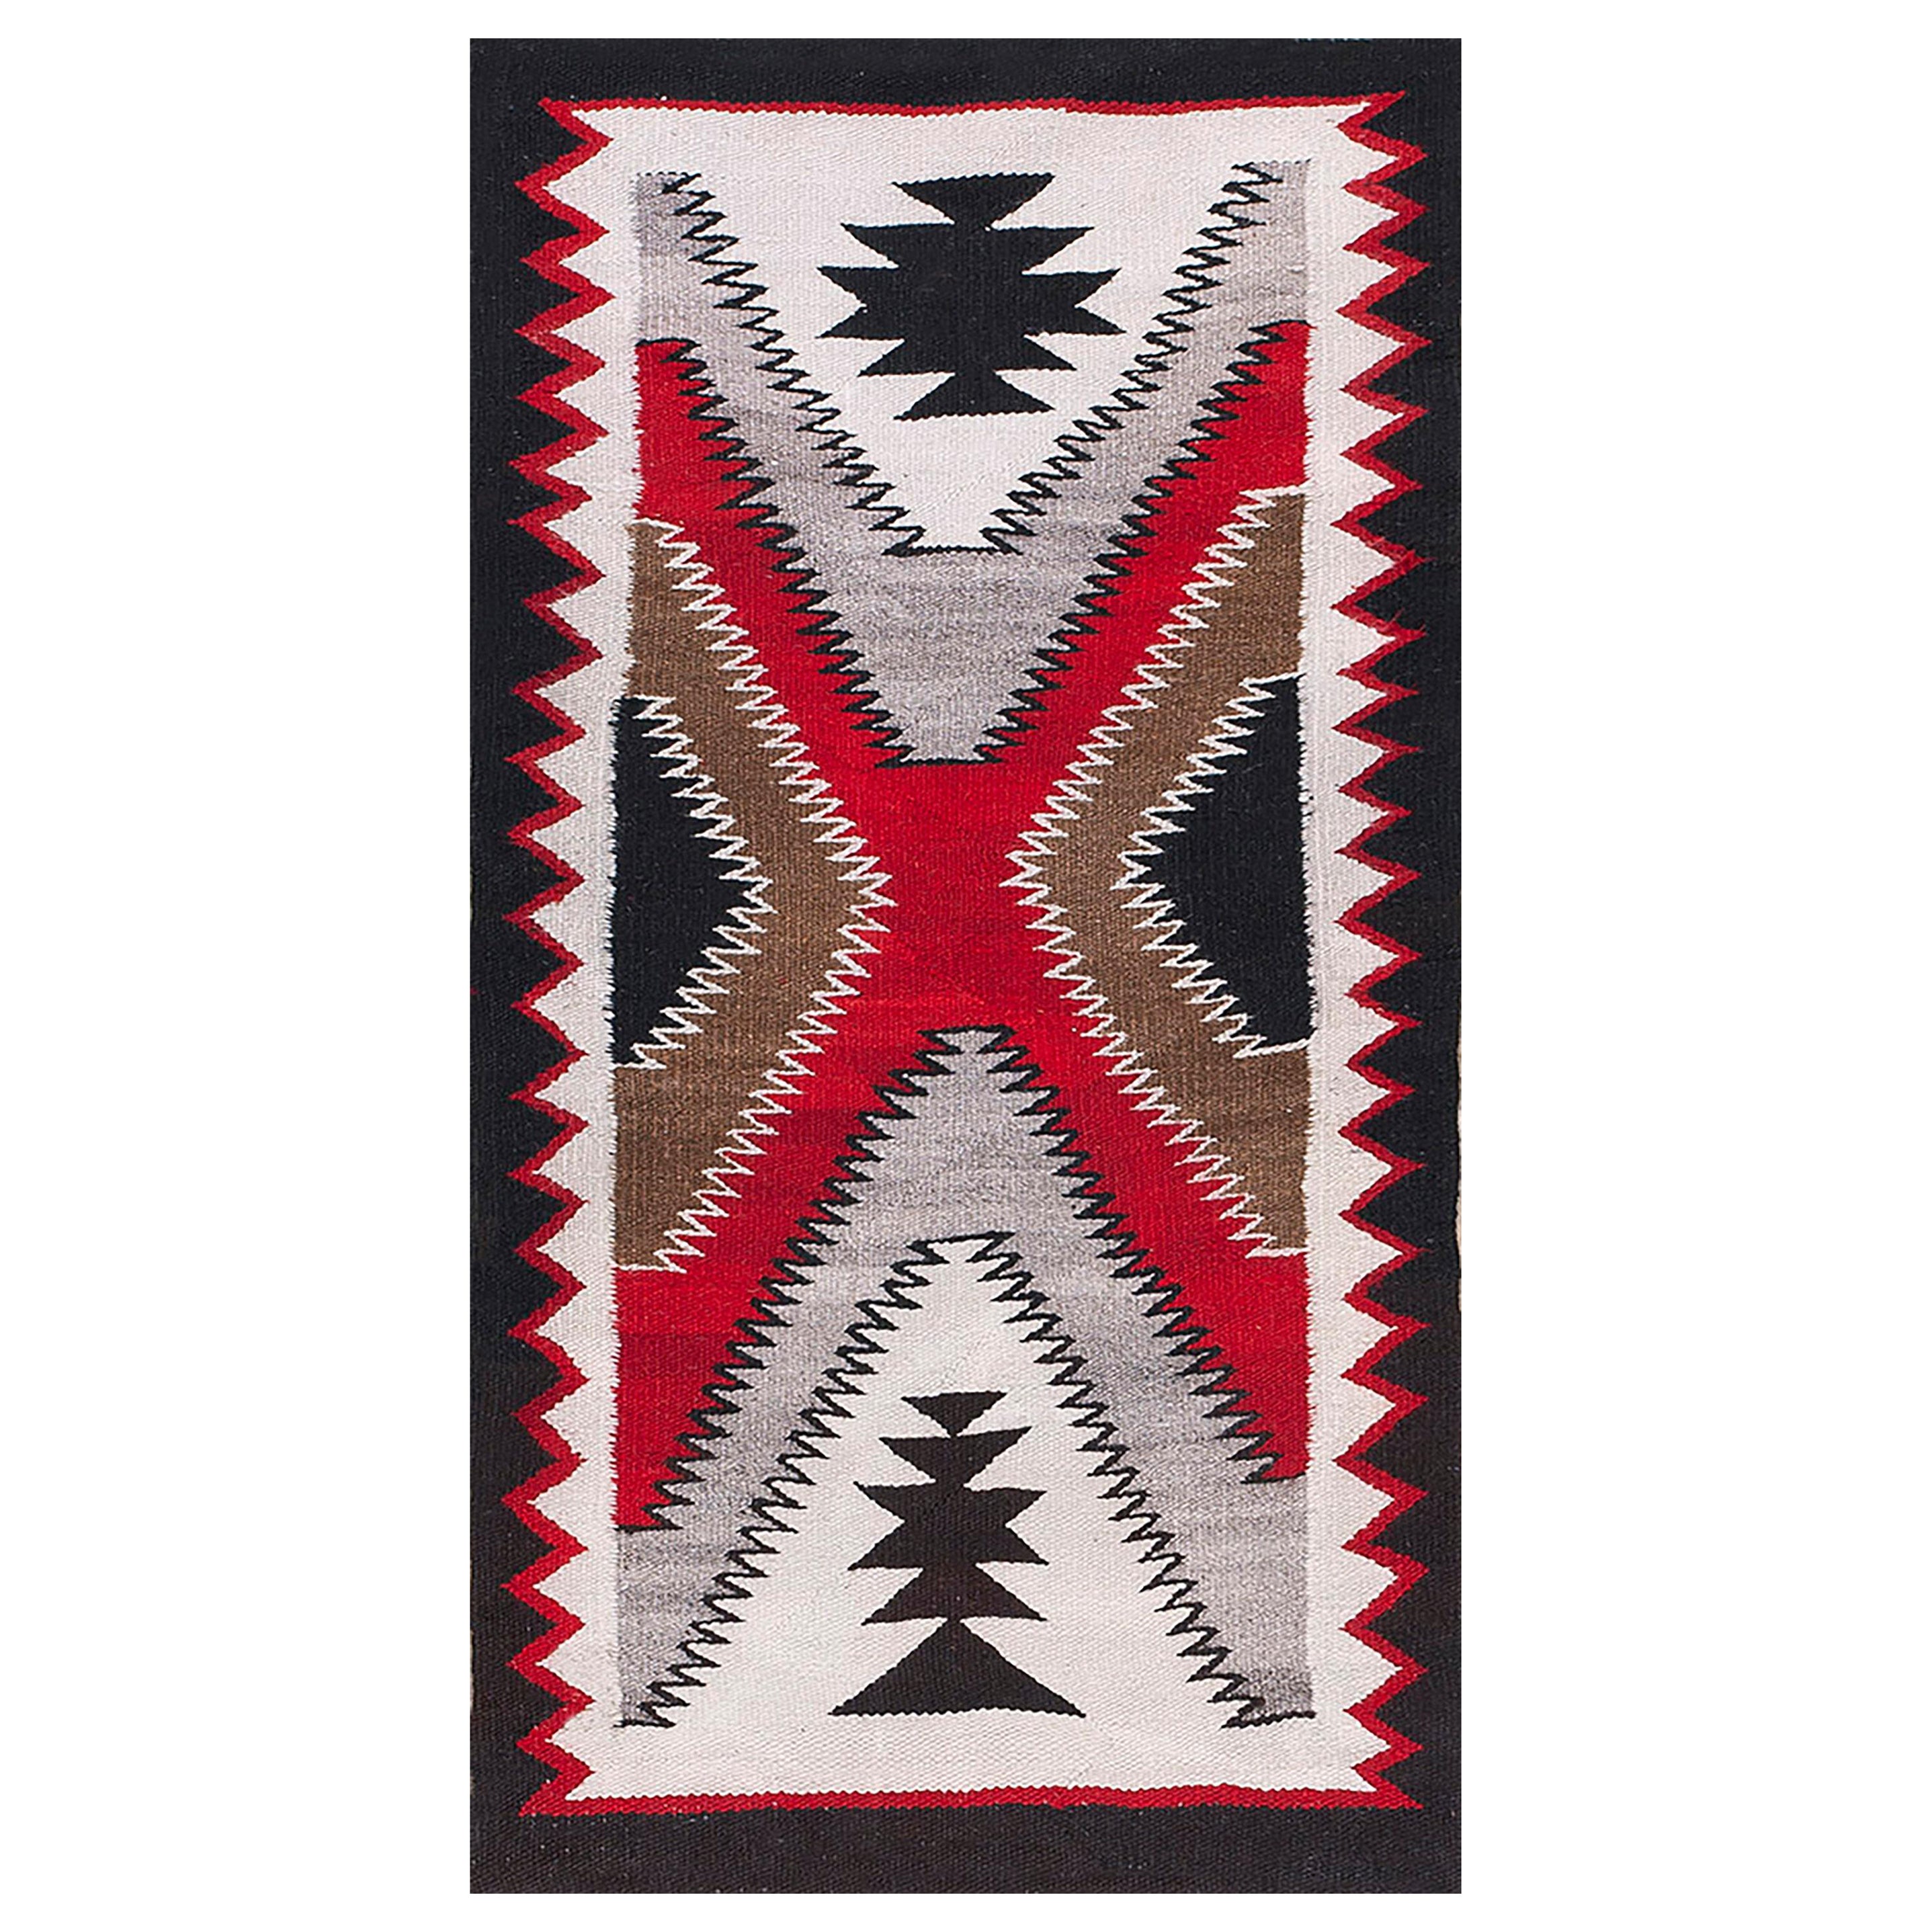 Early 20th Century American Navajo Carpet ( 2'2" x 4'3" - 66 x 130 ) For Sale